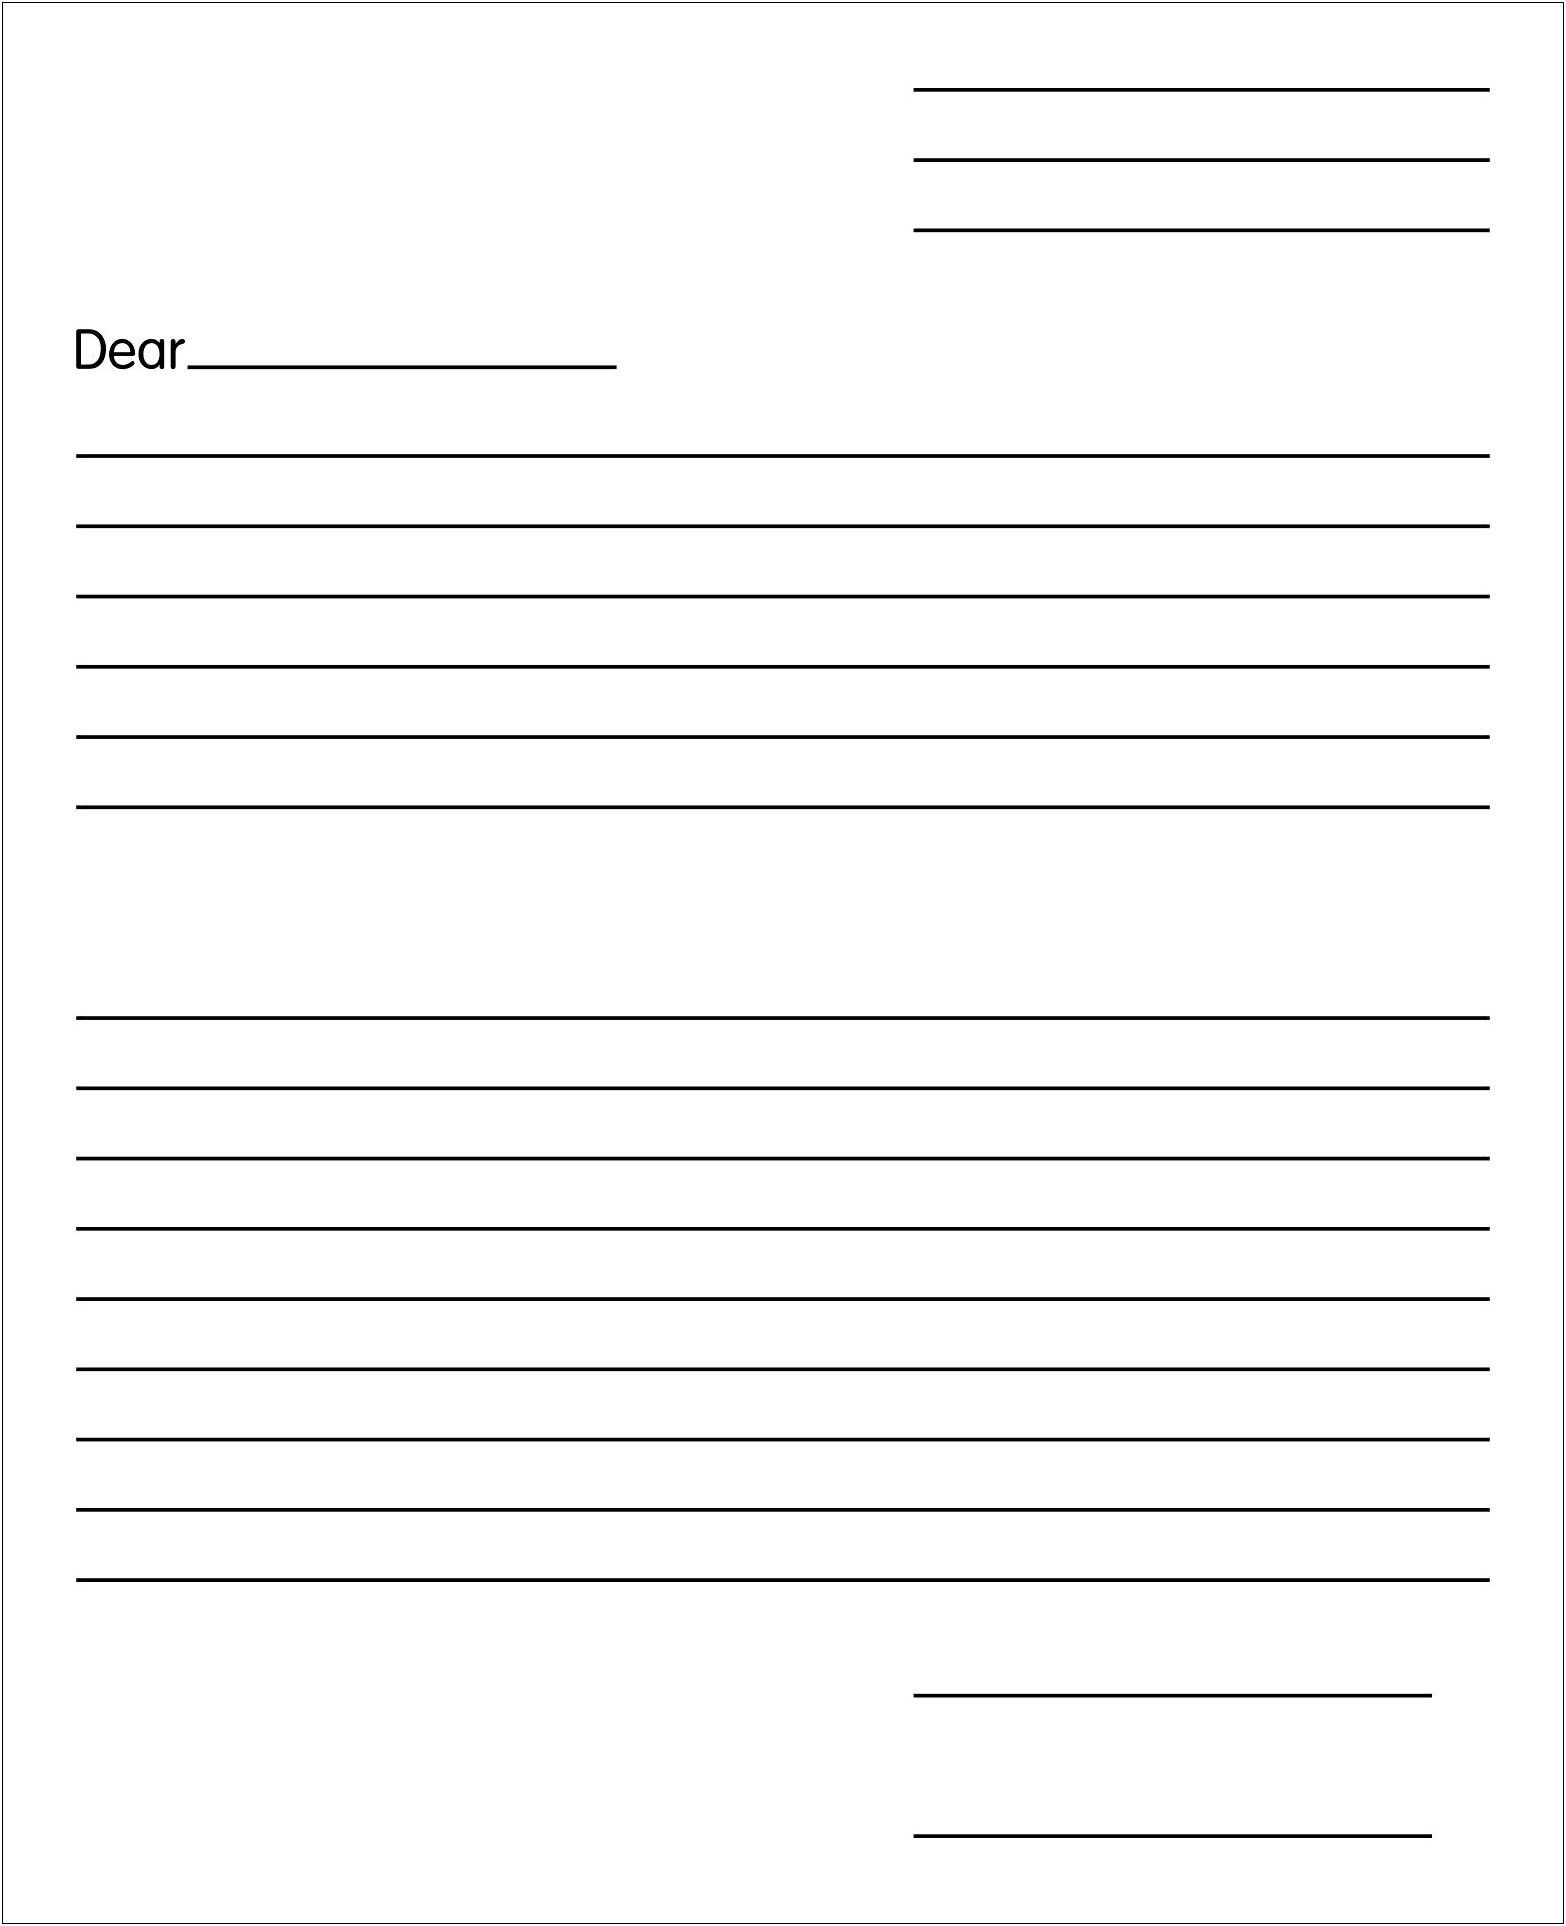 Free Templates For Writing A Personal Letter